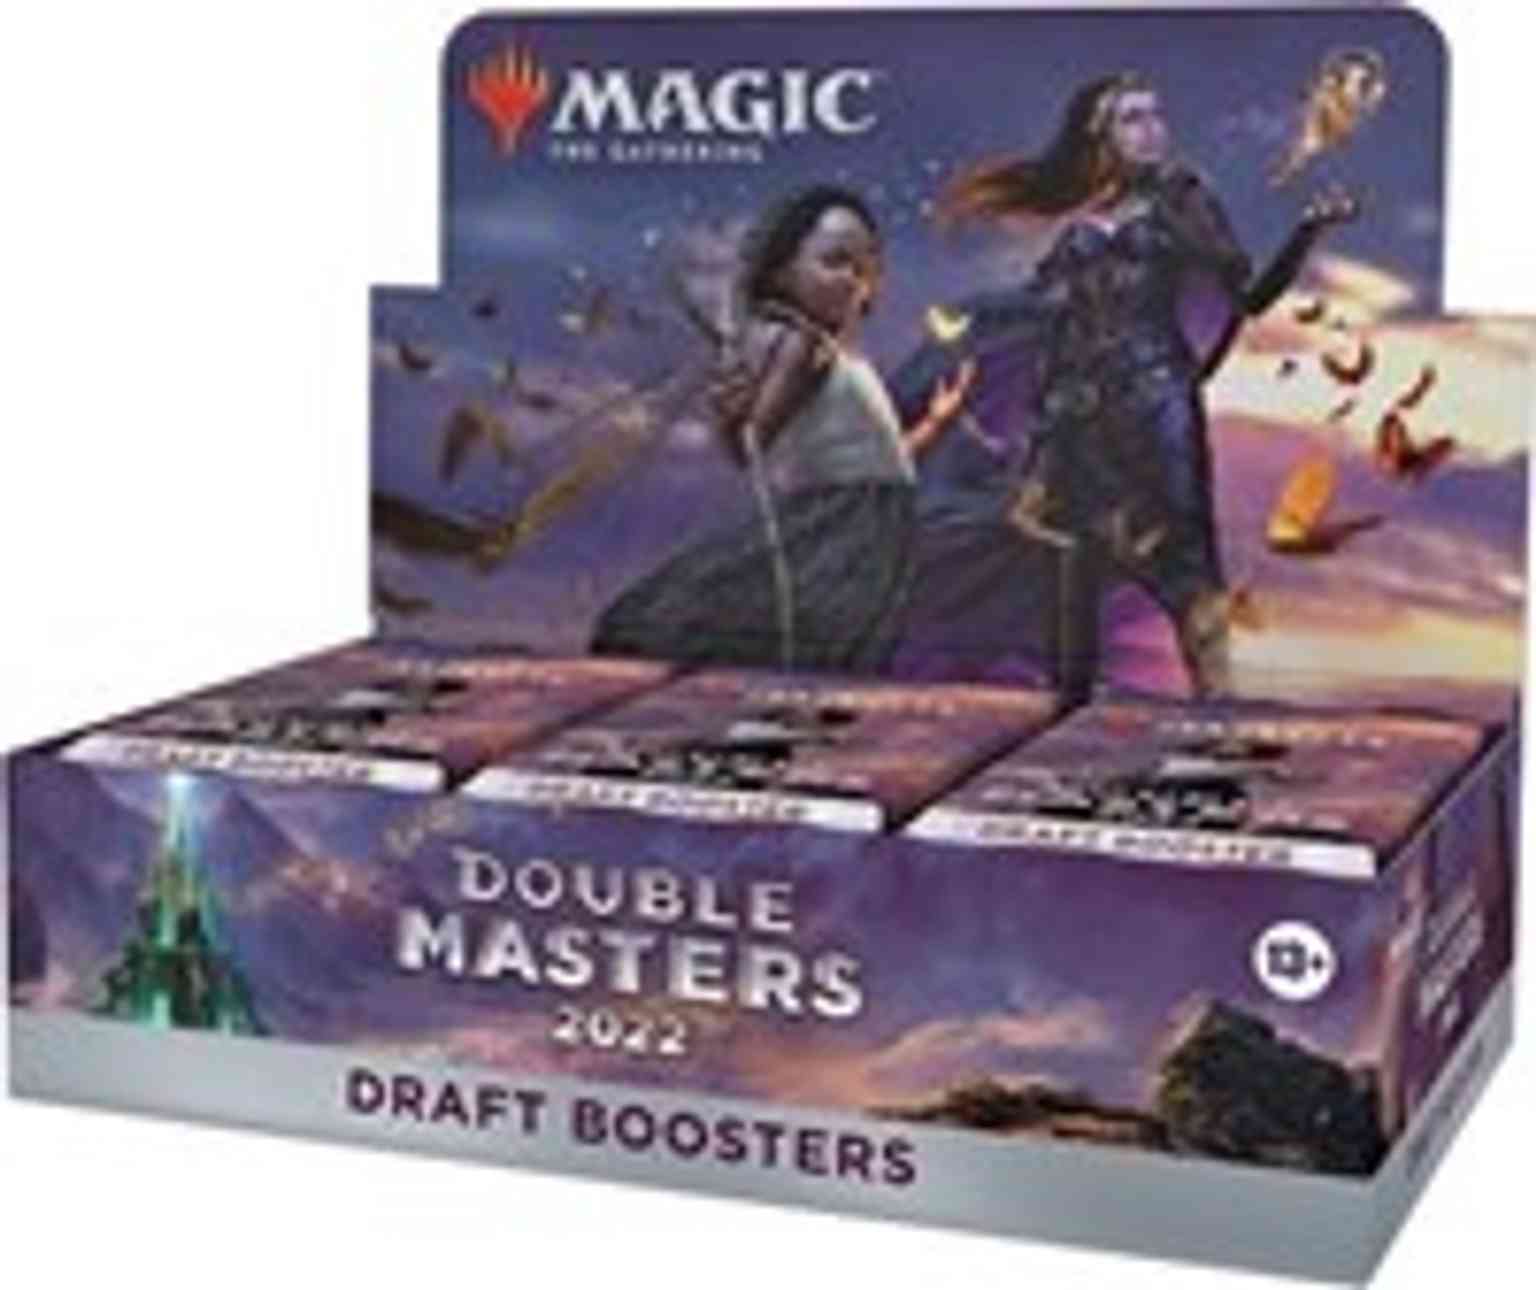 Double Masters 2022 - Draft Booster Box magic card front